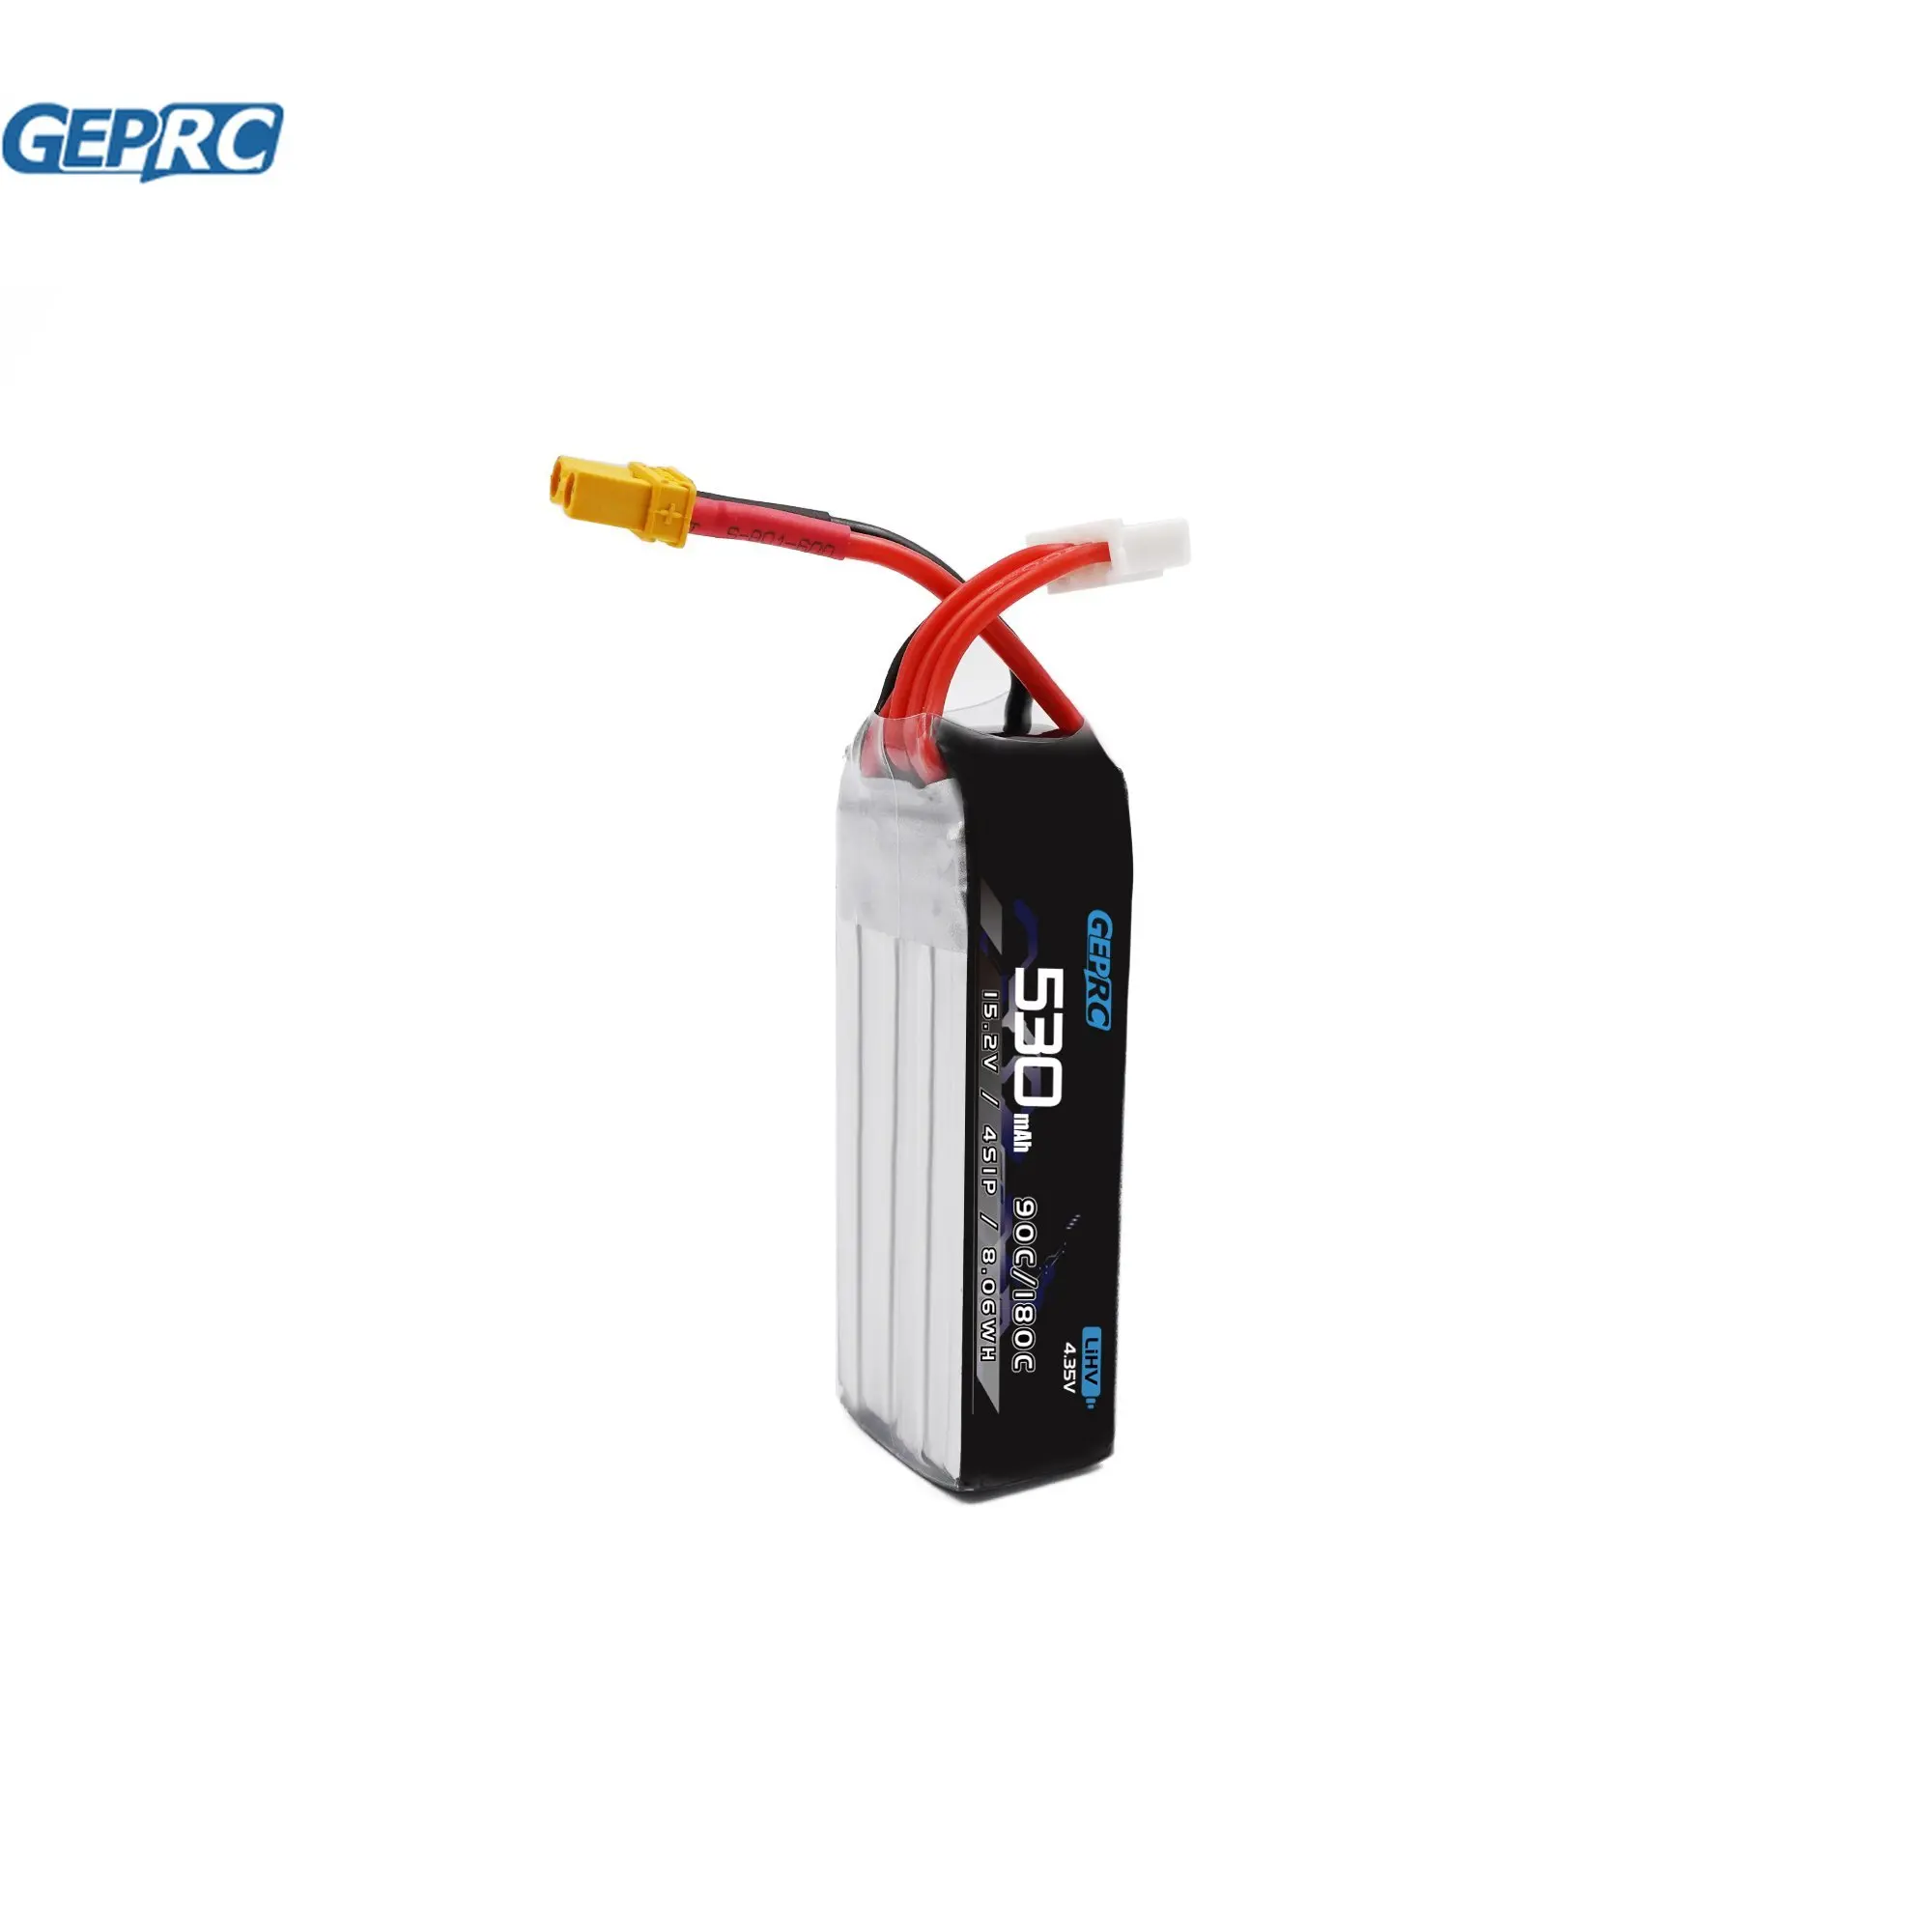 

GEPRC 4S 530mAh 90/180C HV 3.8V/4.35V LiPo Battery Suitable For 2-3Inch Series Drone For RC FPV Quadcopter Accessories Parts